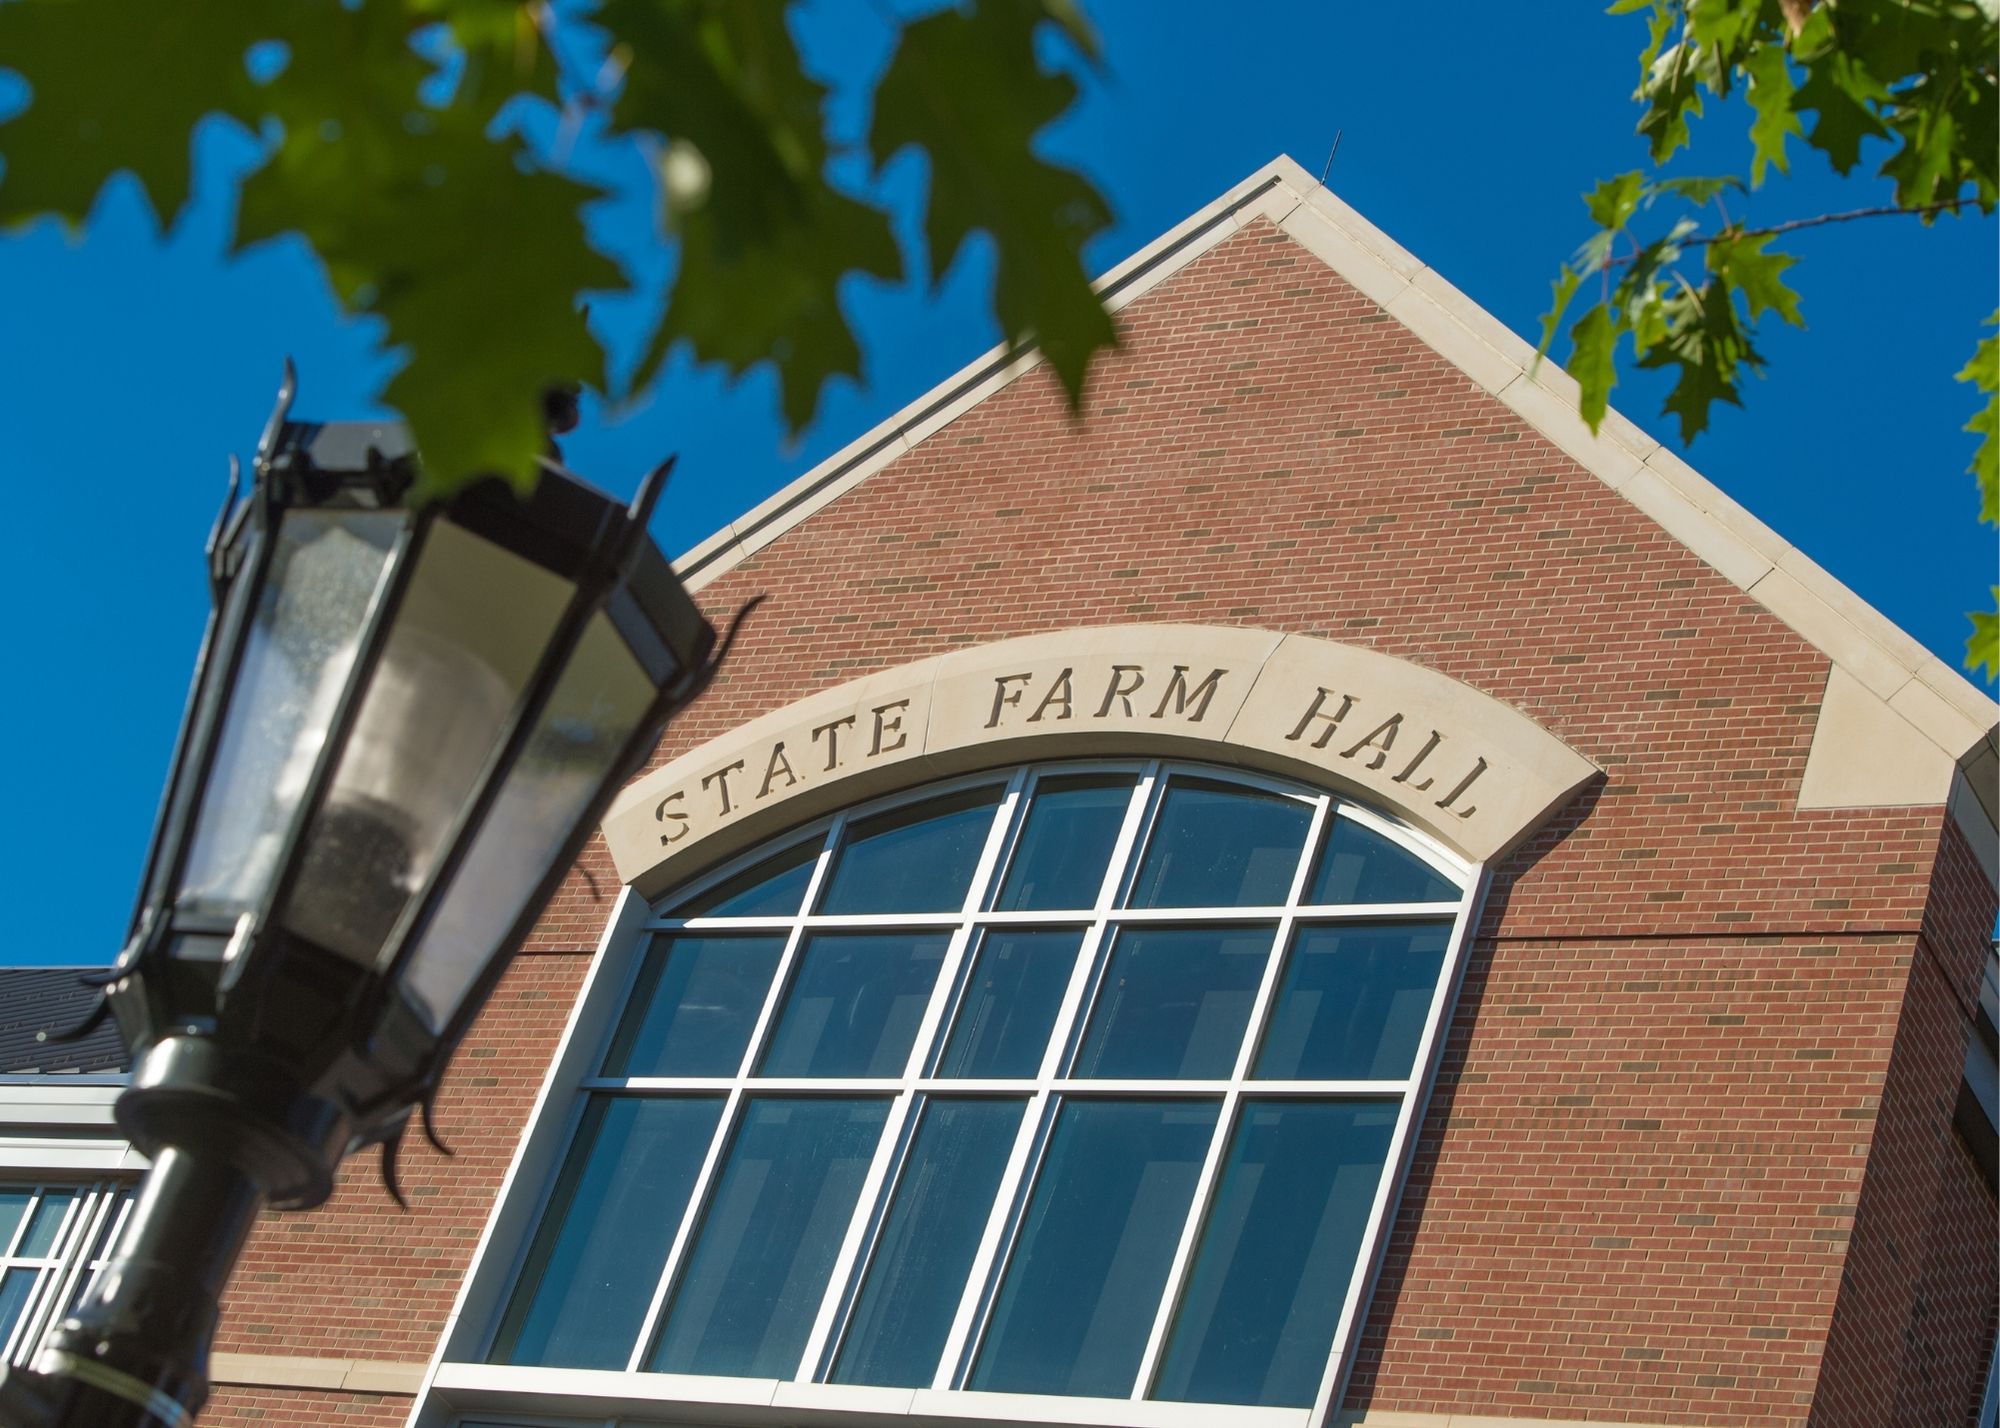 state farm hall with lamppost